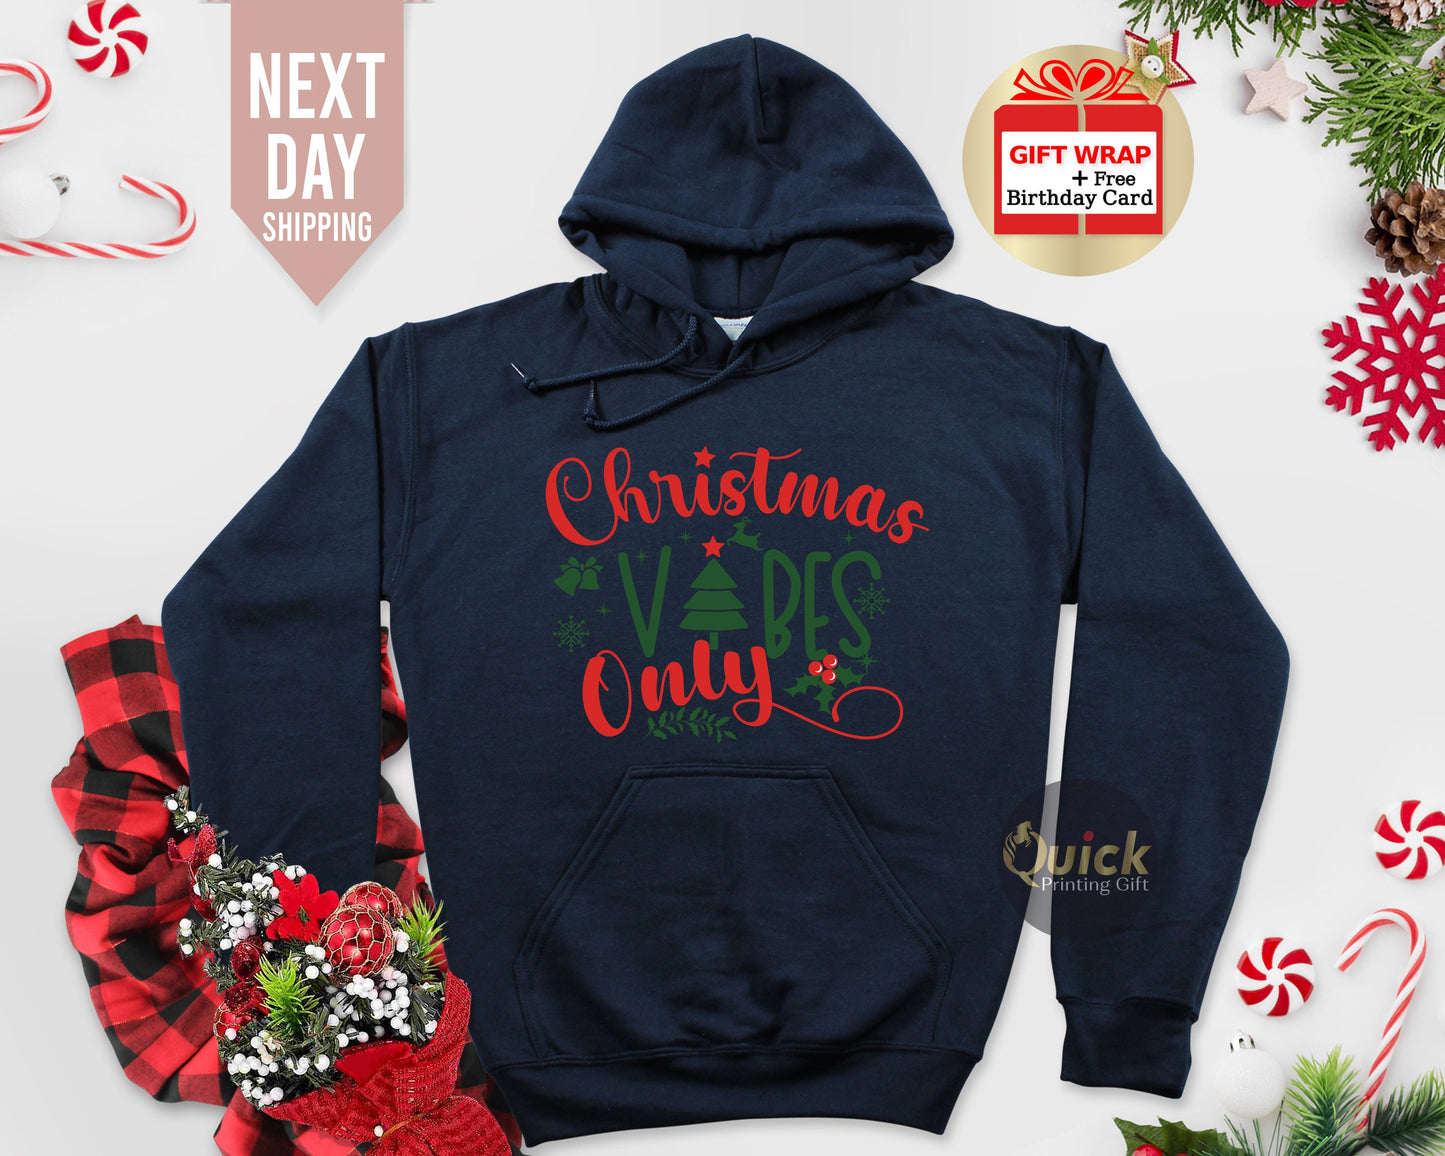 Christmas Vibes Only Hoodie, Christmas Party Hoodie, Holiday Hoodie, Merry Christmas Hoodies for Men Women